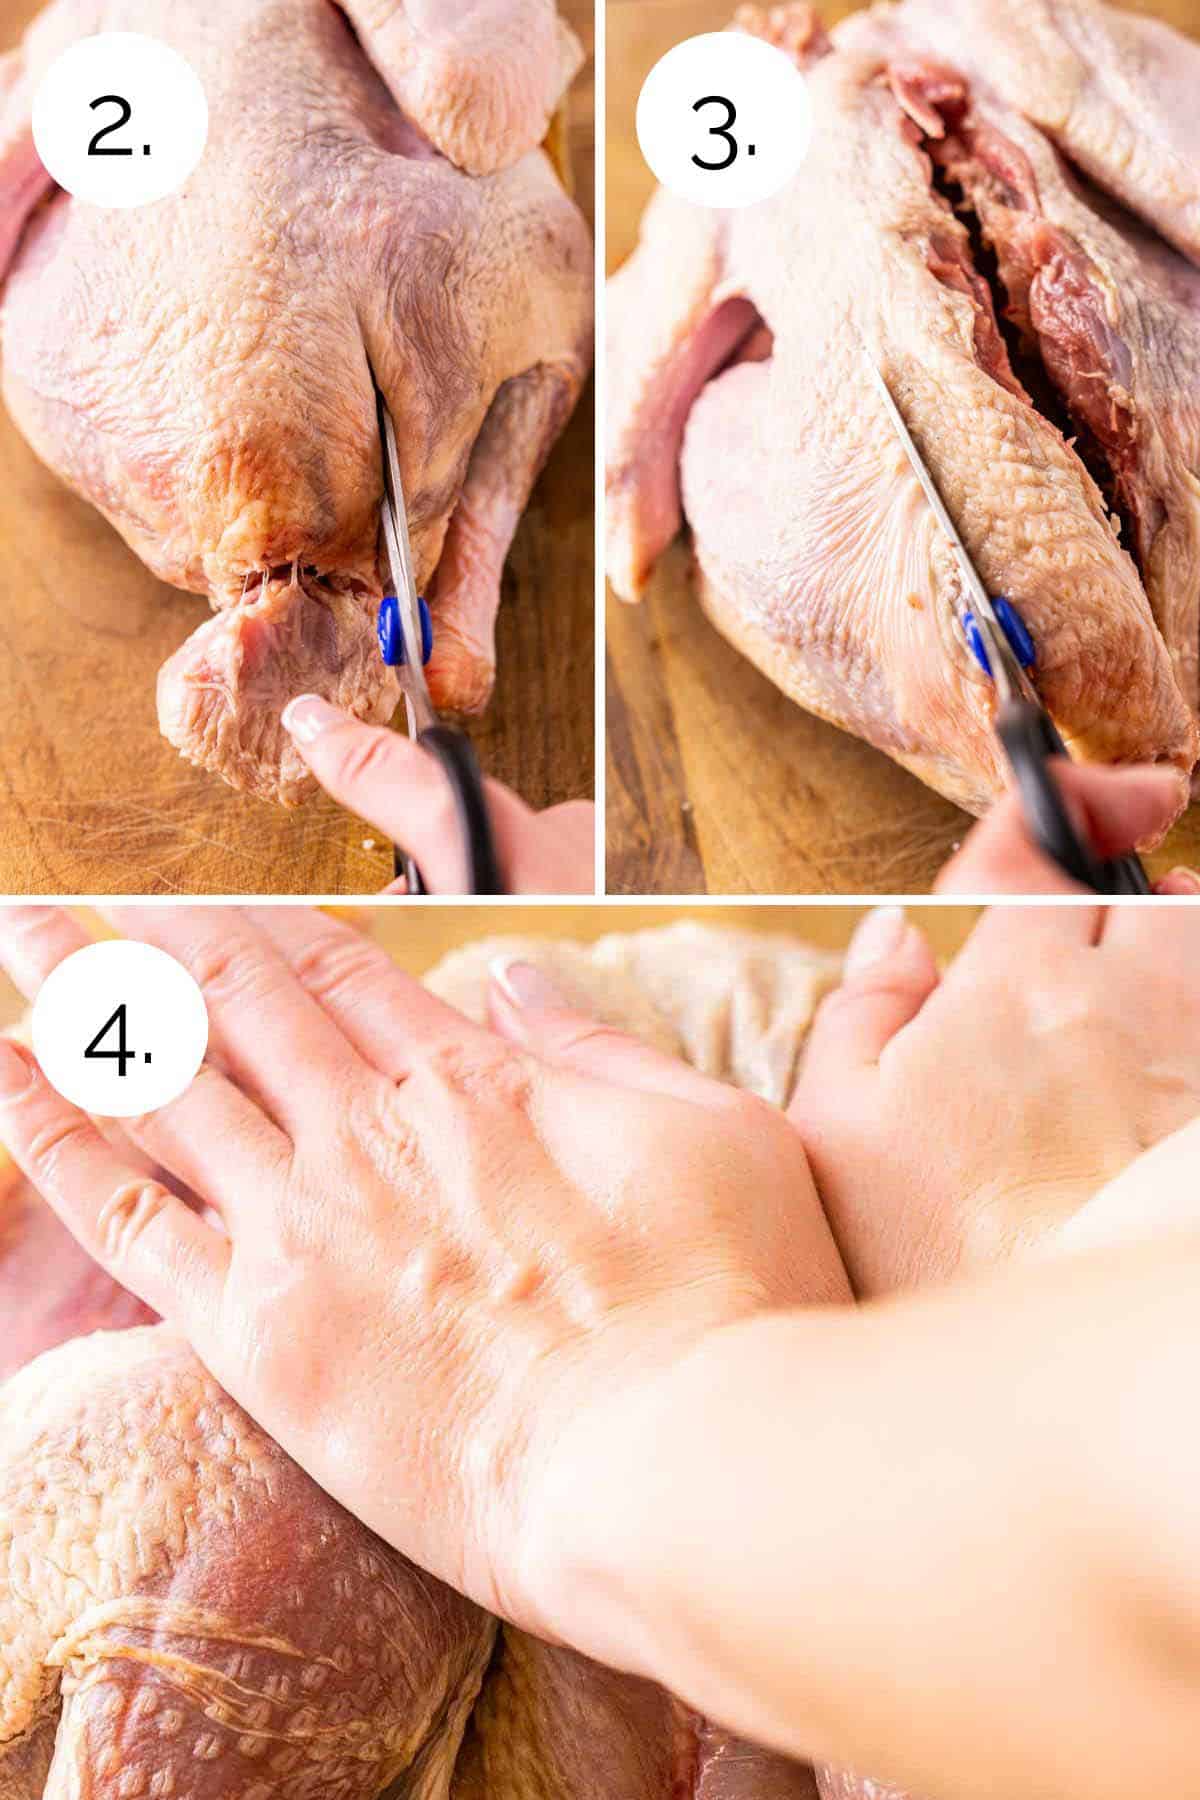 A collage showing the process of removing the backbone and flattening the breast to spatchcock the turkey.